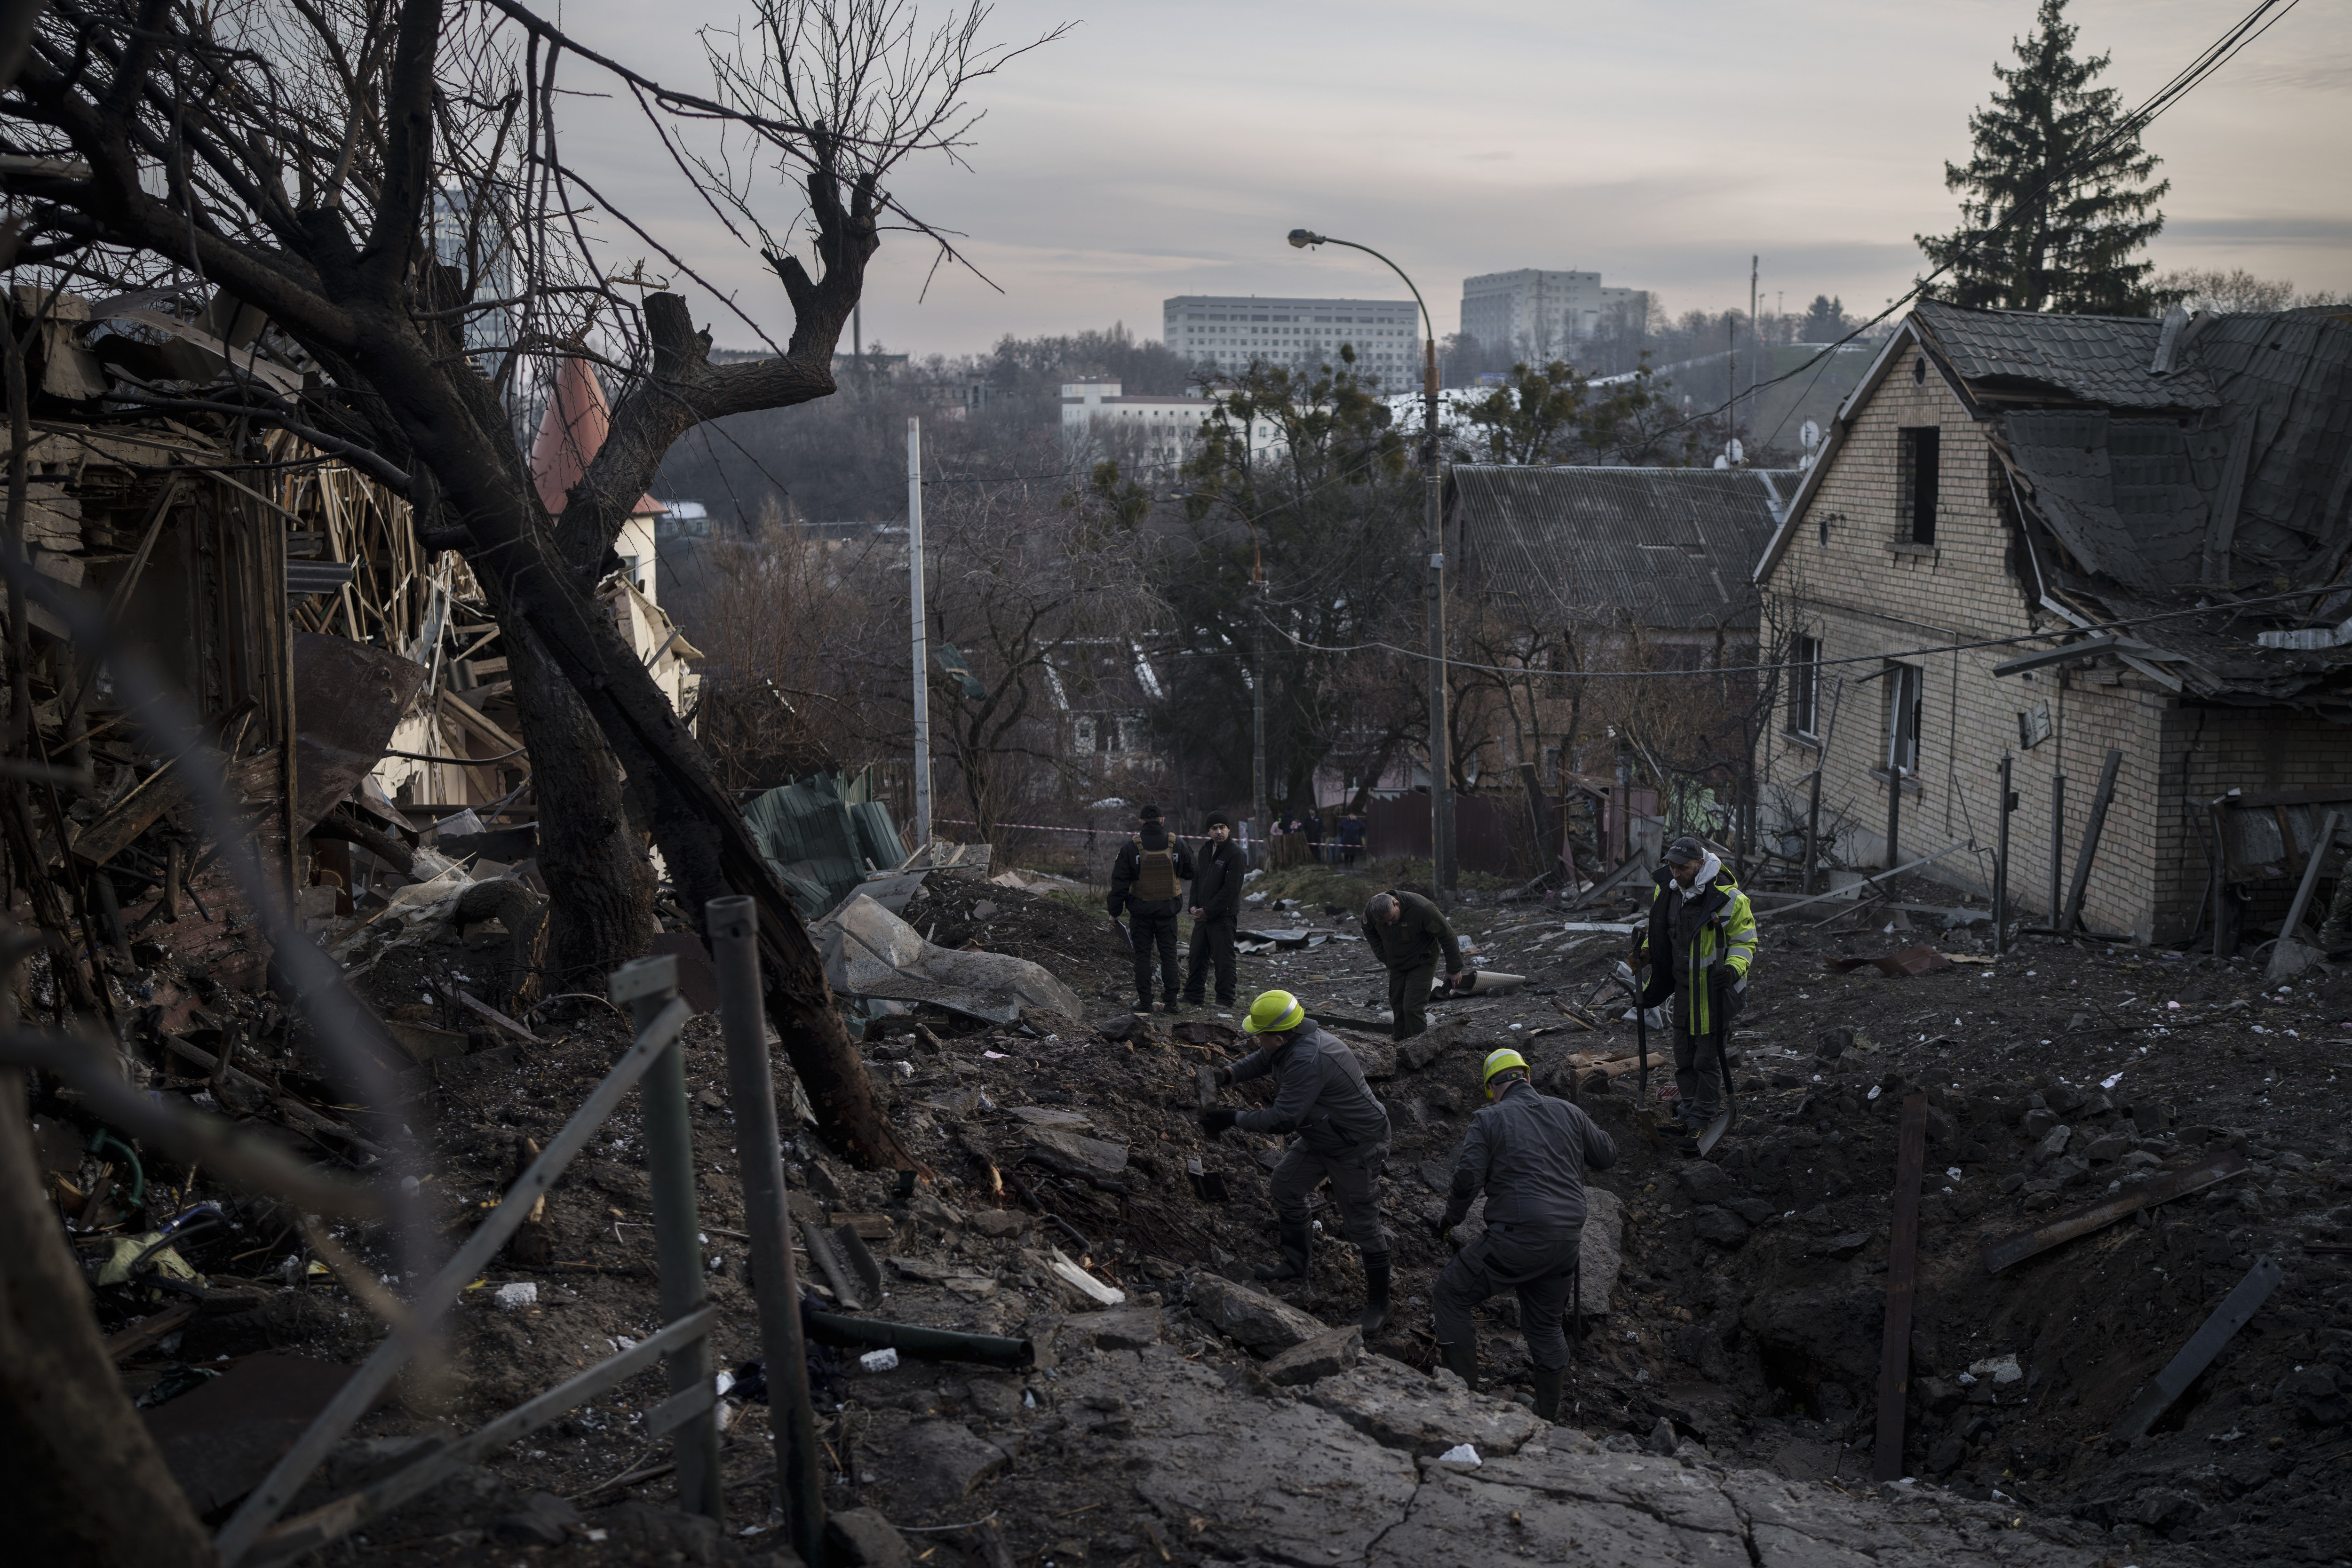 Workers inspect a pothole in a residential street after a Russian attack on Saturday, December 31, 2022, in kyiv, Ukraine.  (AP Photo/Felipe Dana)